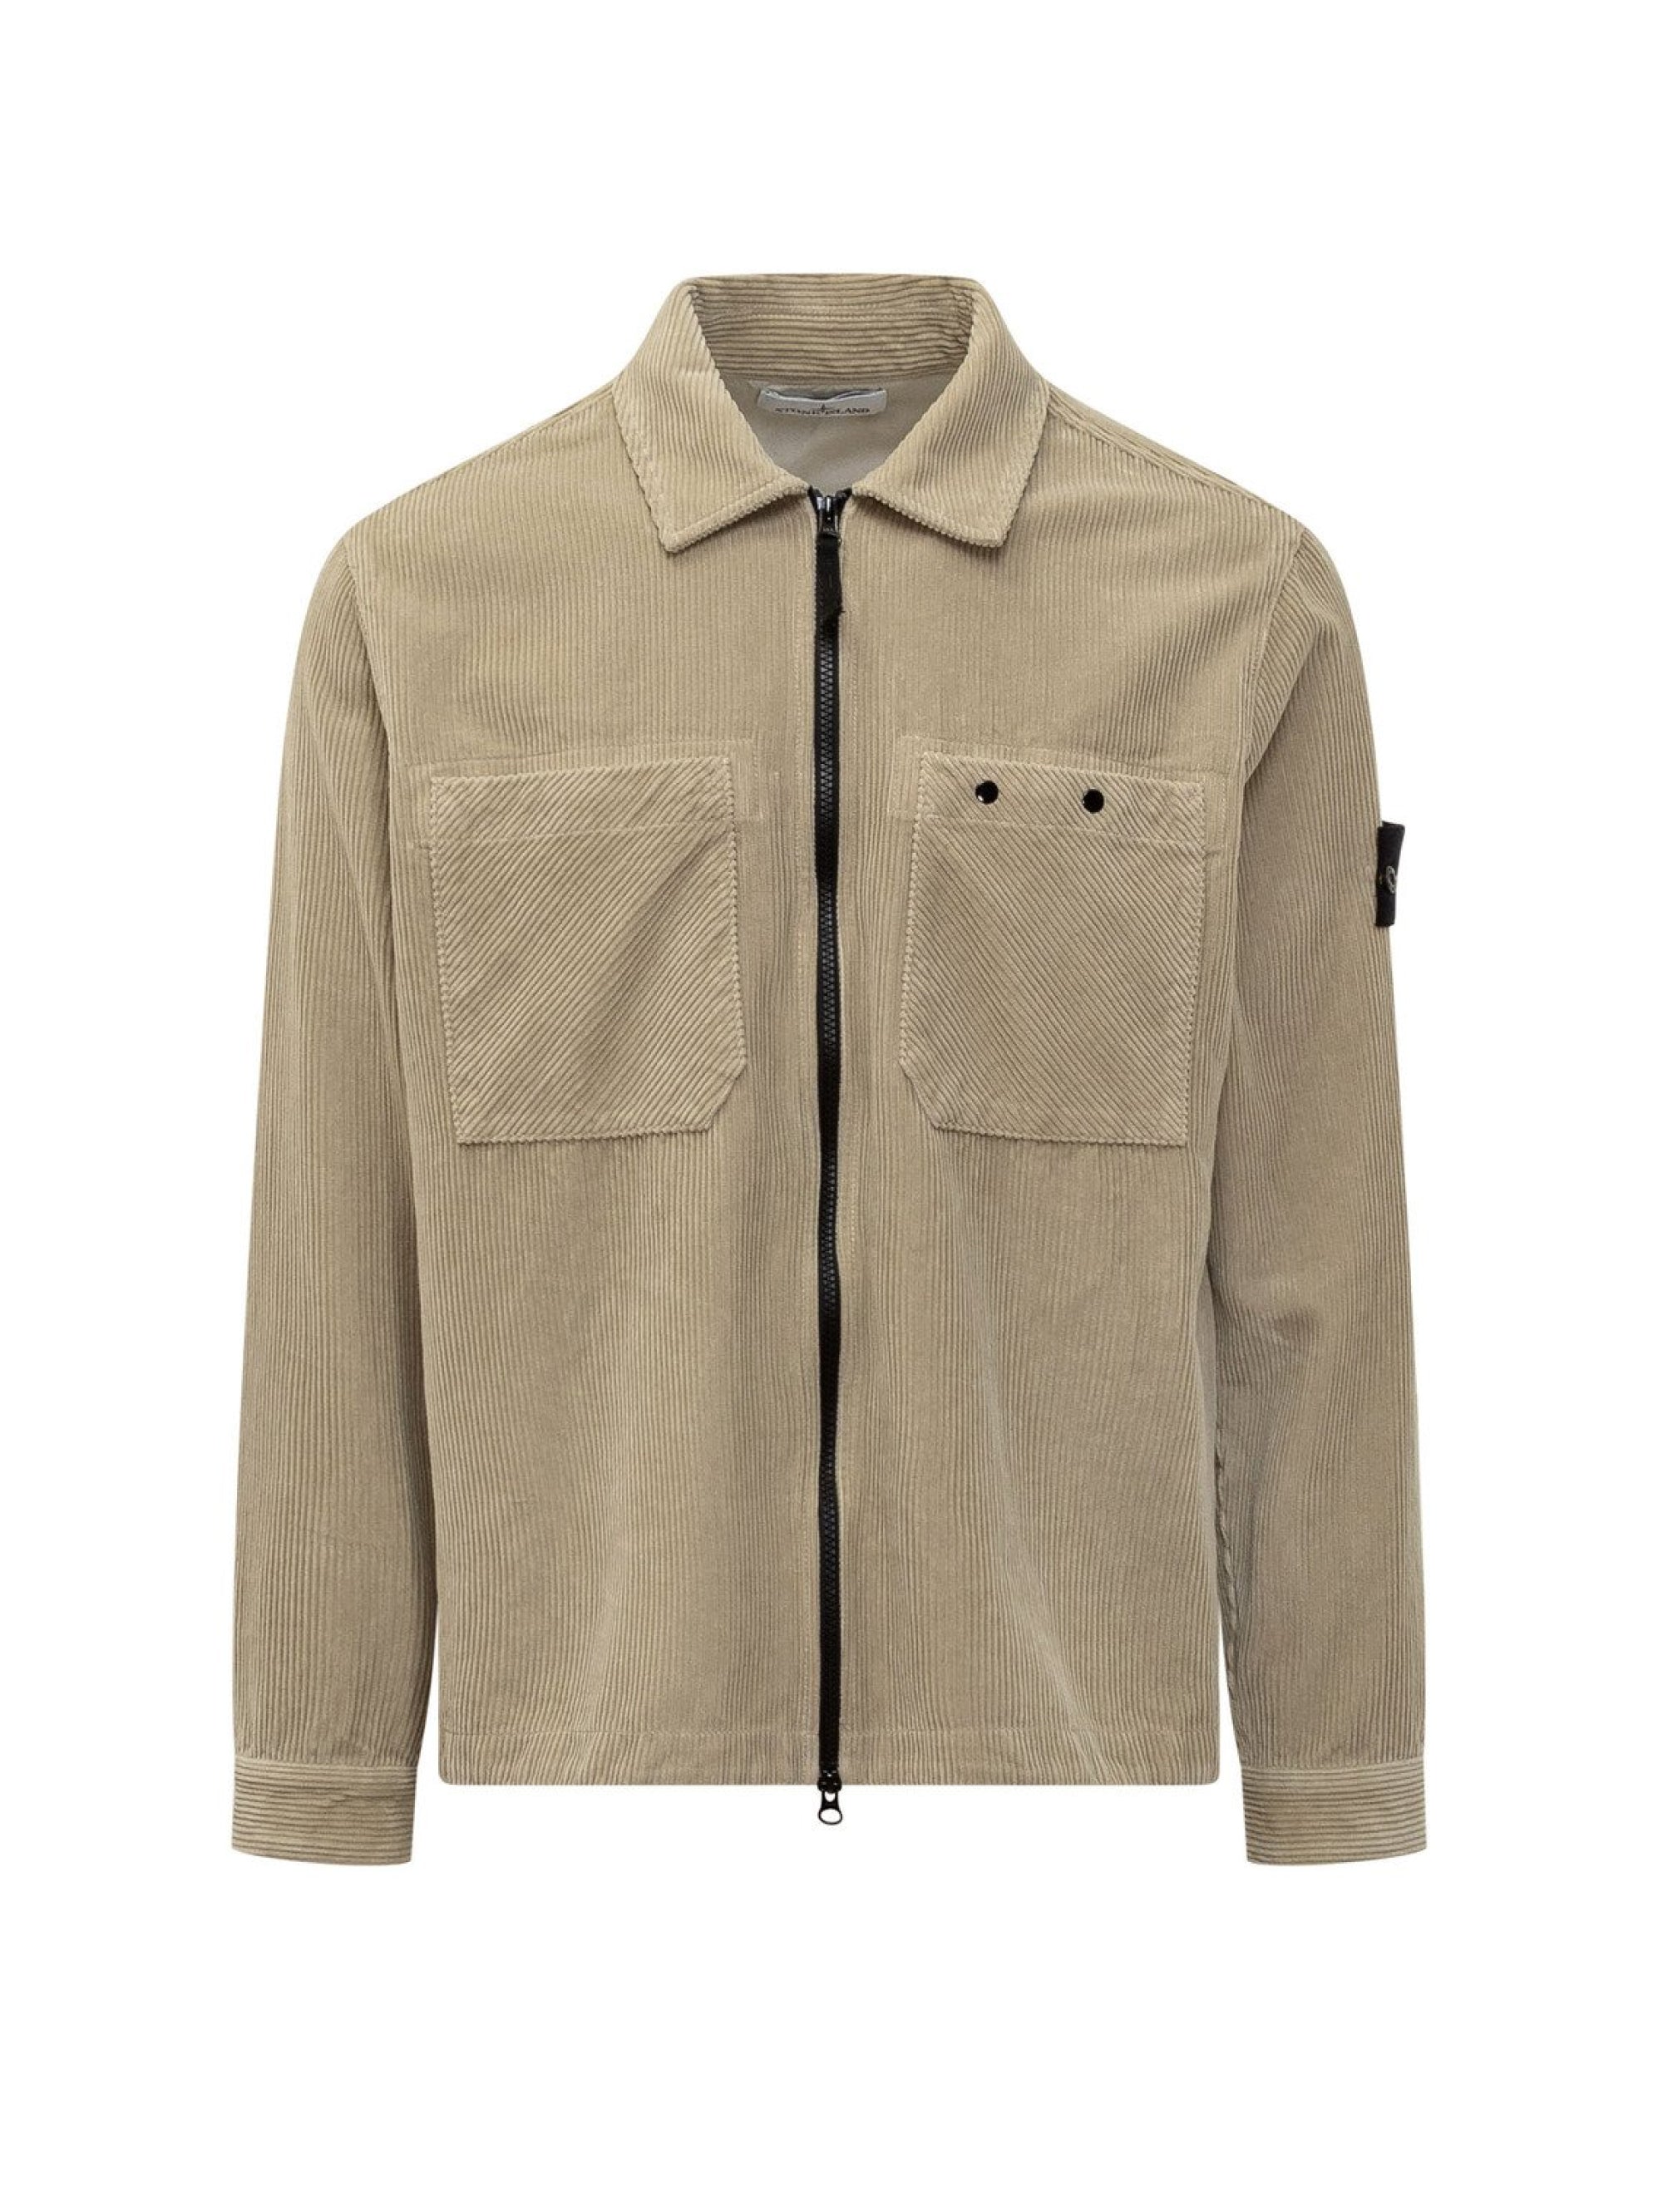 STONE ISLAND-Overshirt in Velluto a Coste Stucco-TRYME Shop